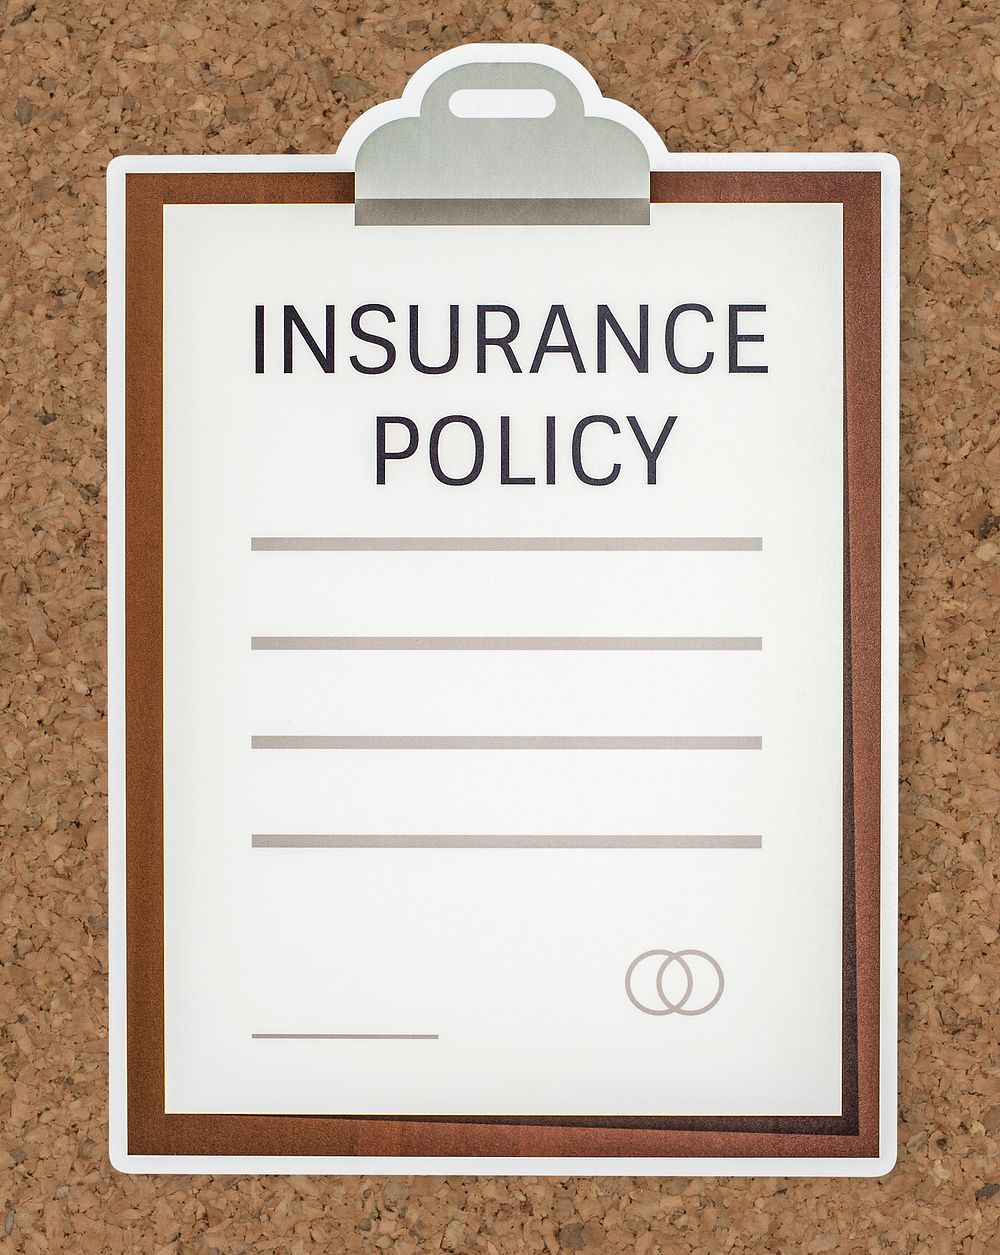 Insurance policy form icon isolated